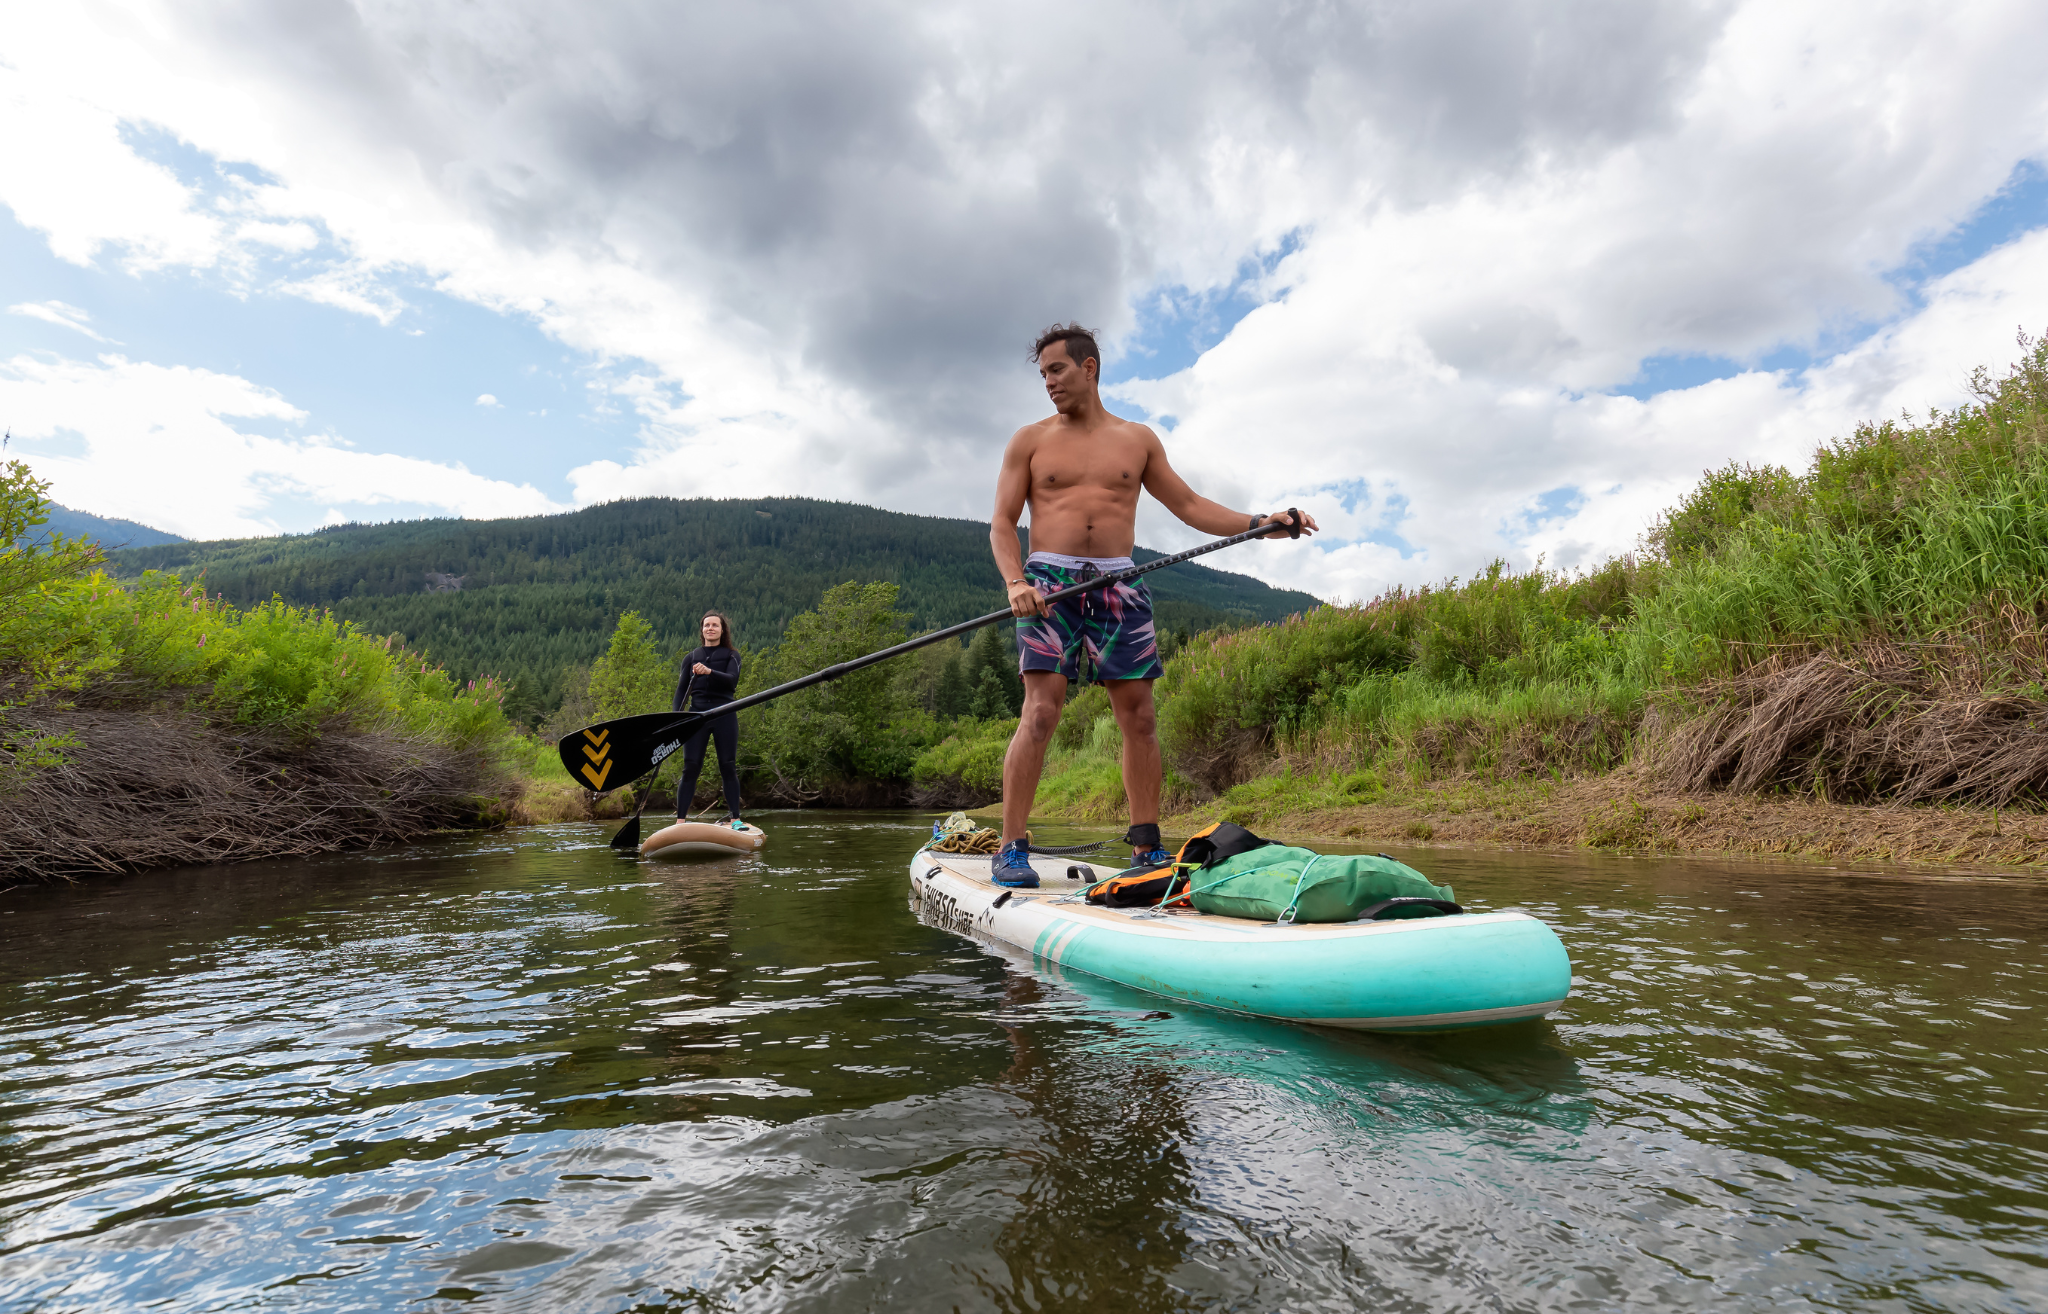 Man and woman paddling down a river - Adventure Wise Travel Gear